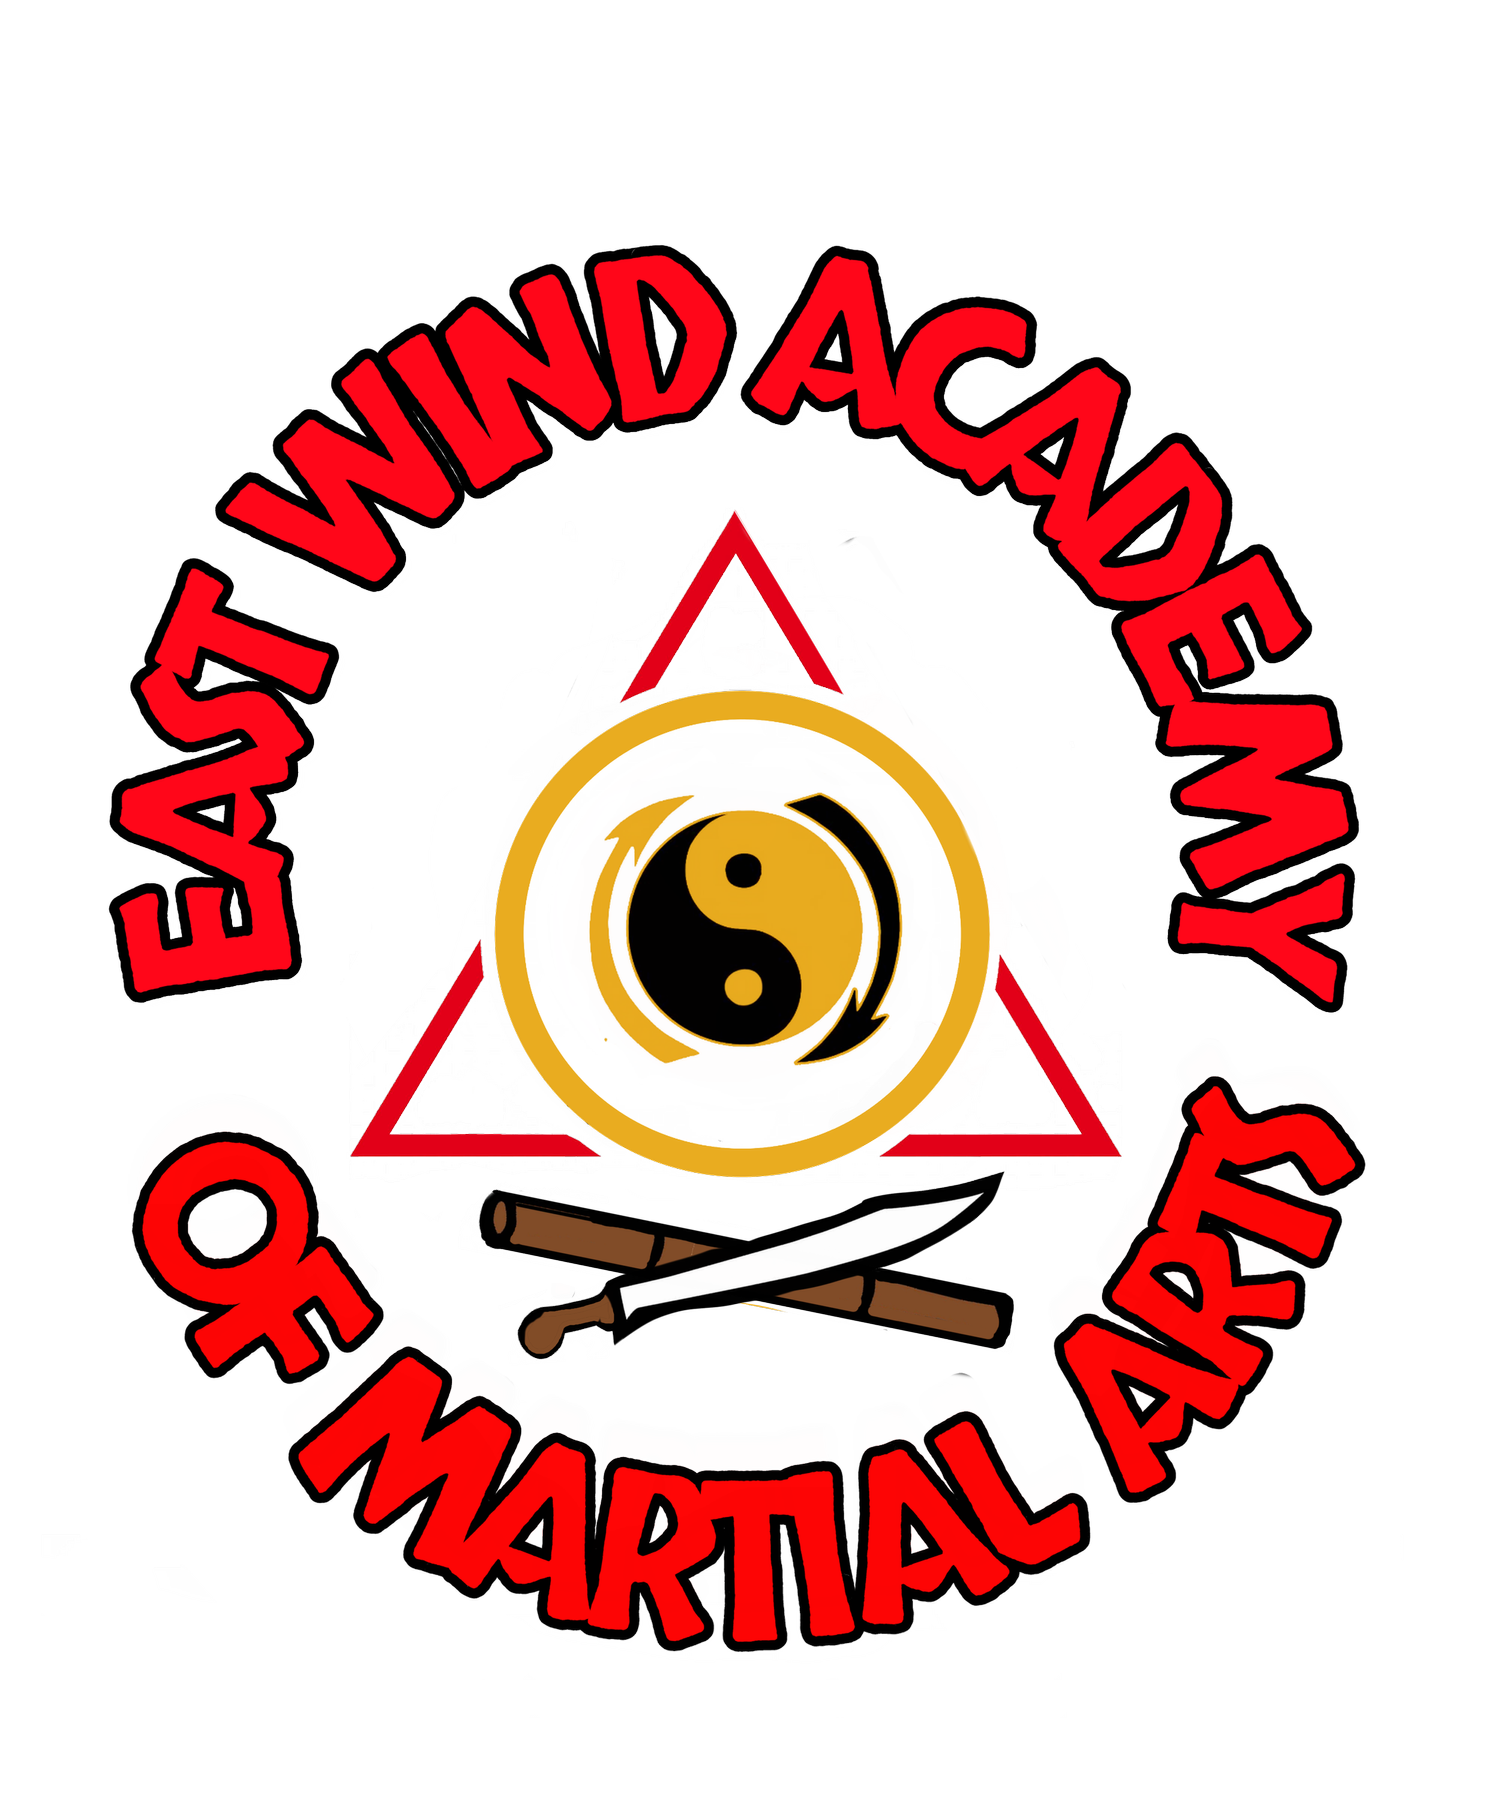 East Wind Academy of Martial Arts